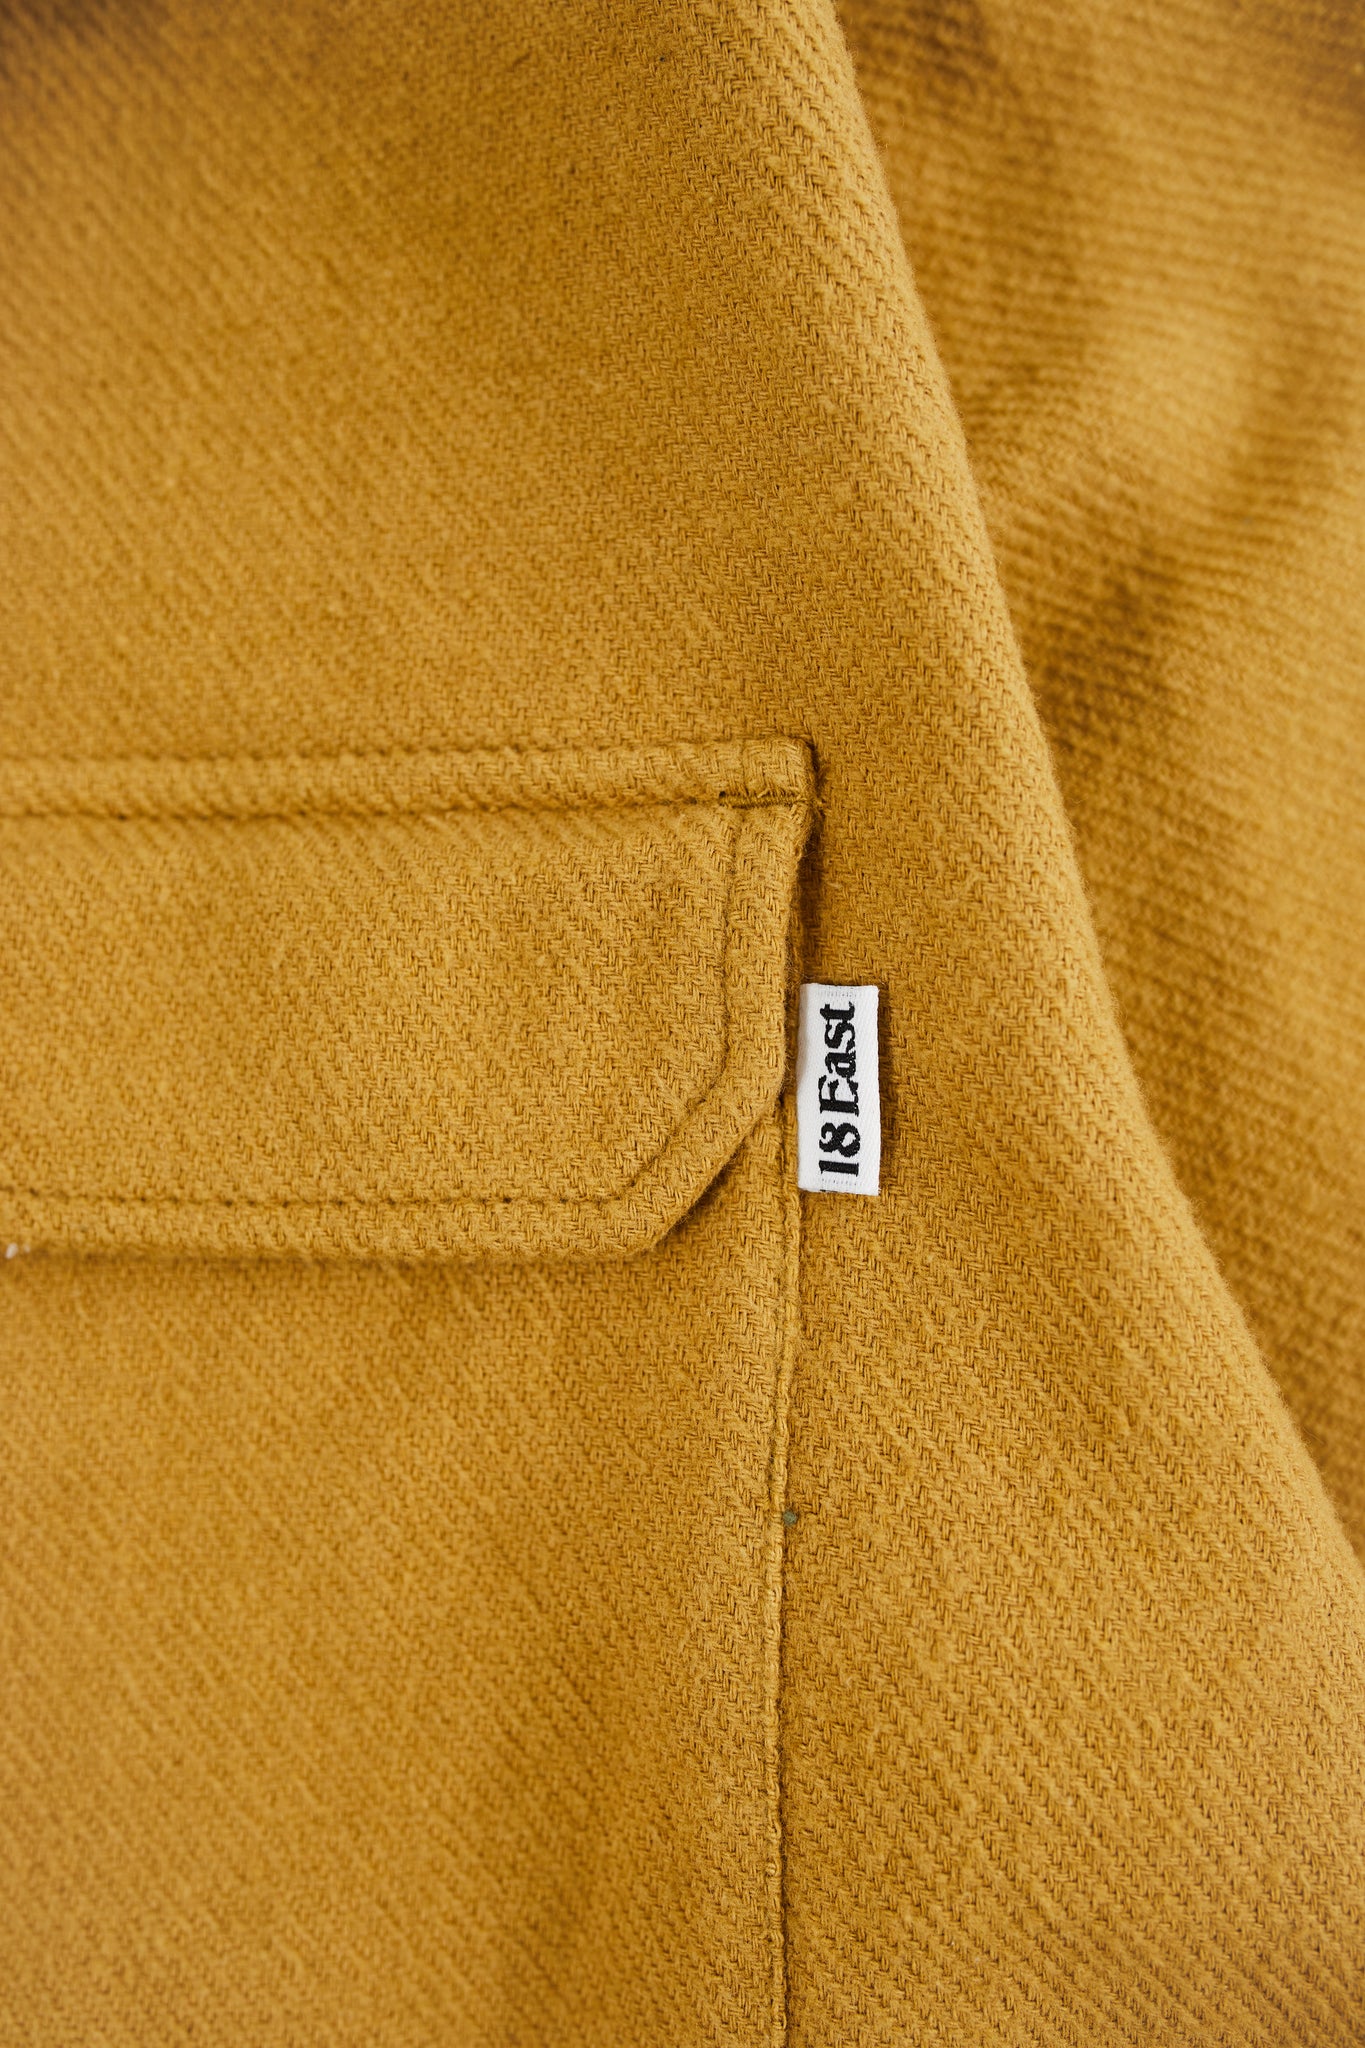 FIELD SHIRT - FENNEL SEED BRUSHED COTTON TWILL